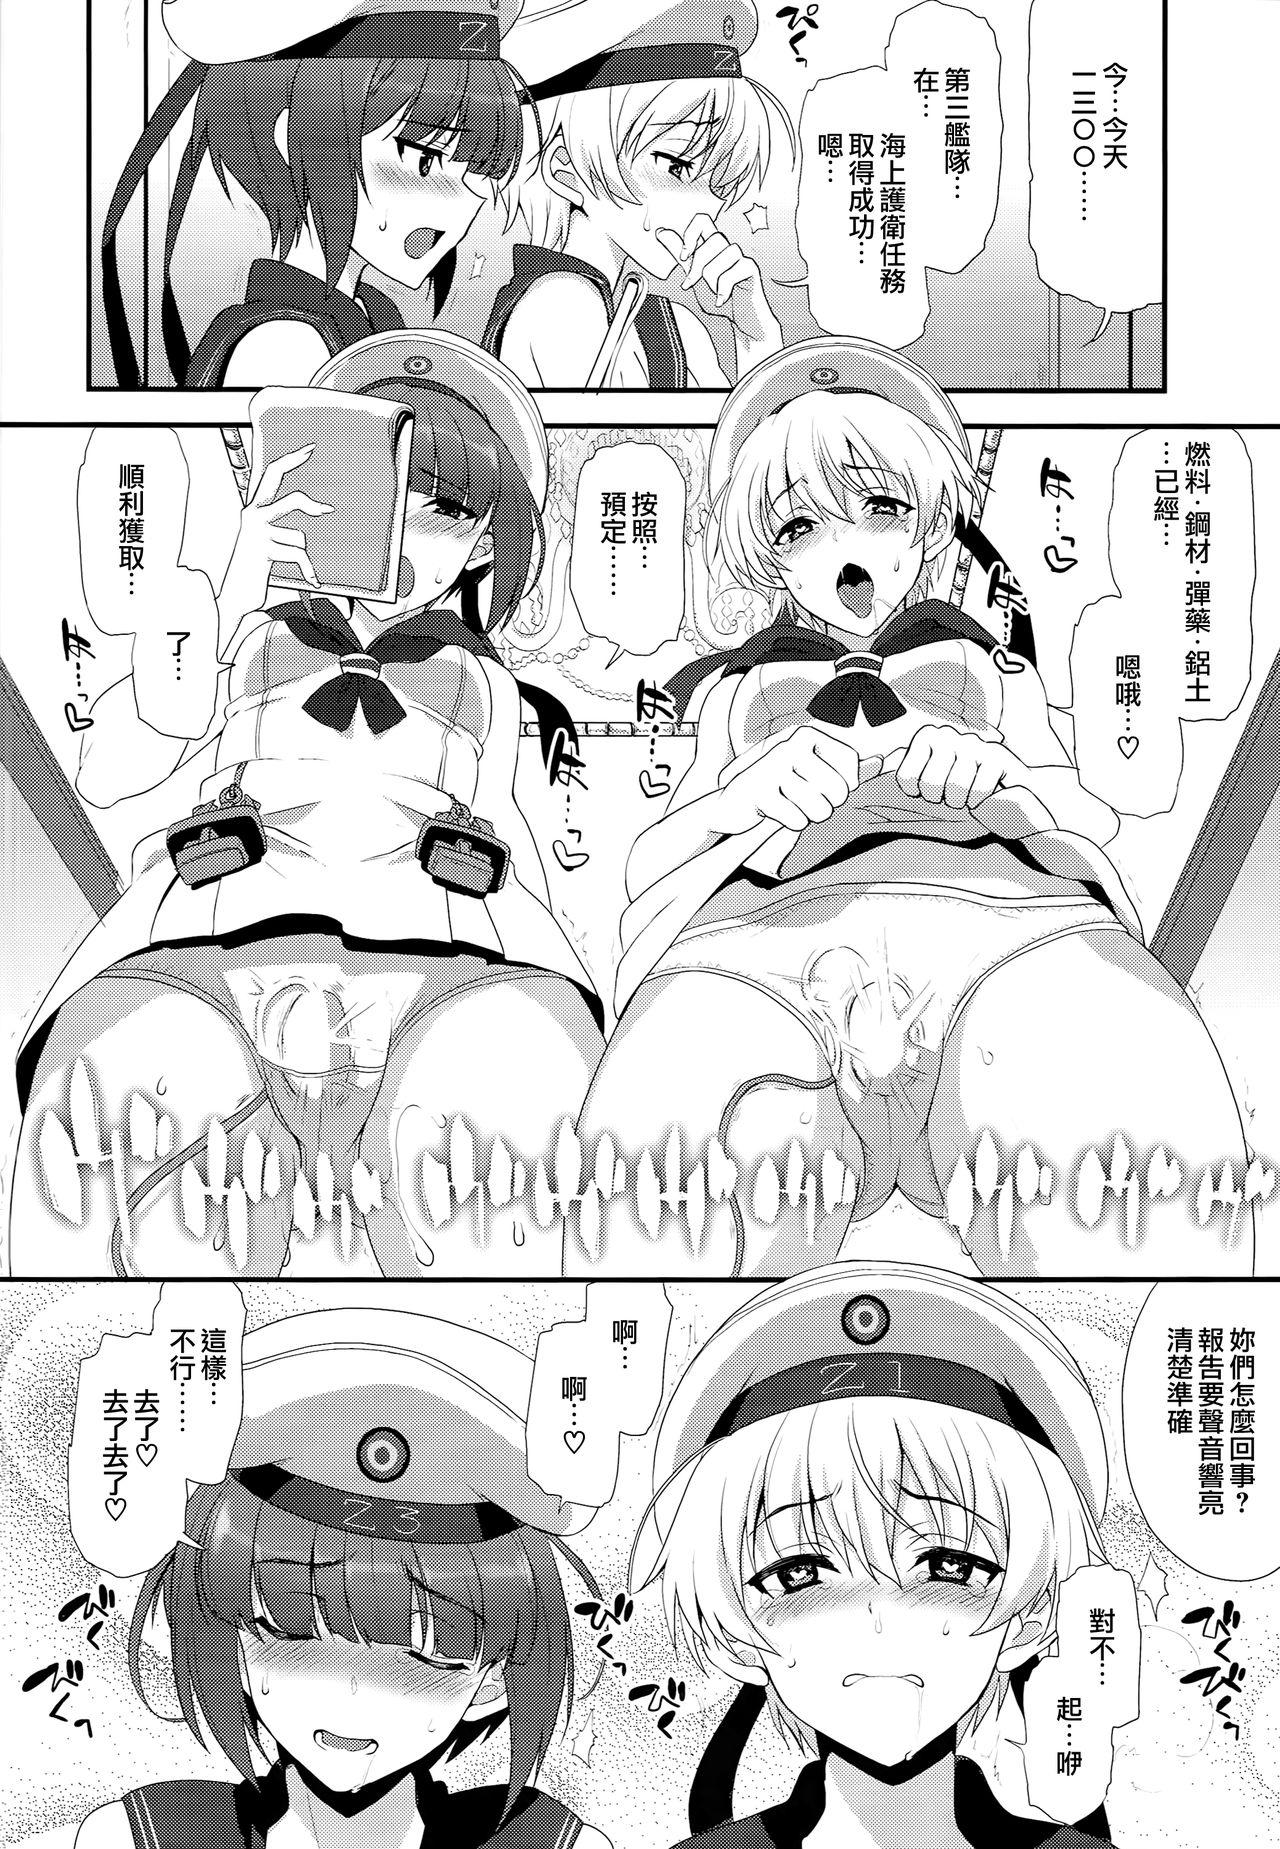 Tits Apfelschorle - Kantai collection Liveshow - Page 12